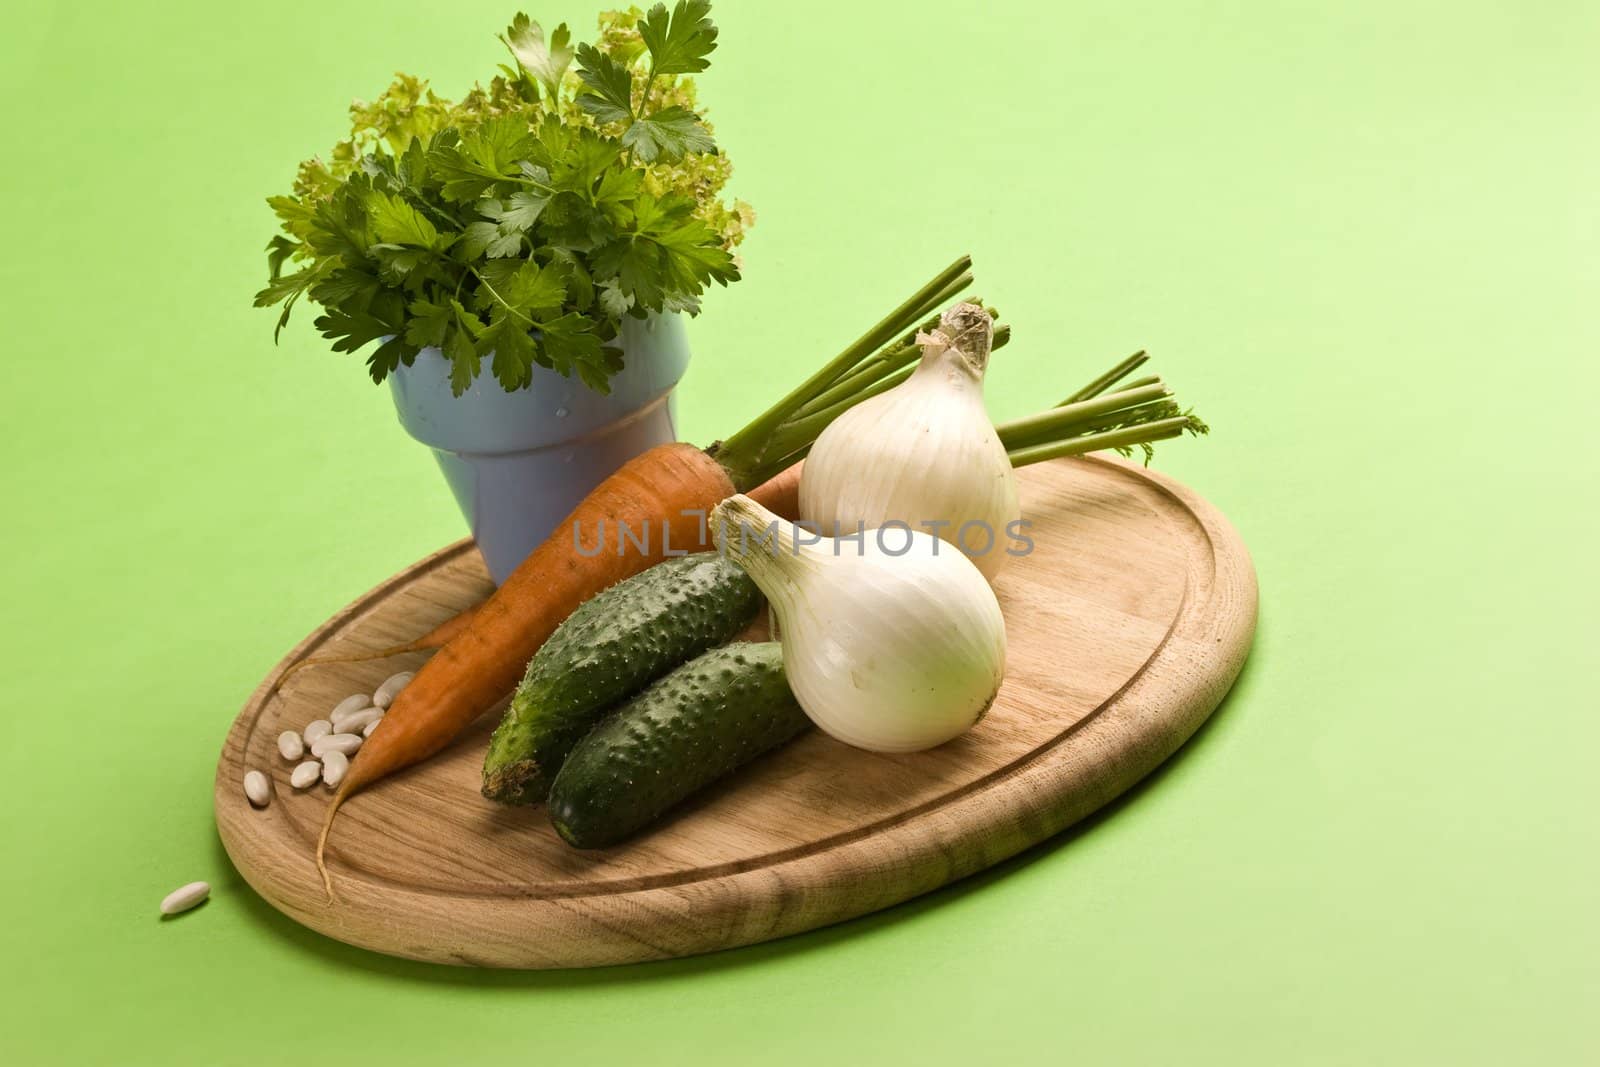 vegeterian food, fresh vegetables: onion, carrot, cucumber and parsley